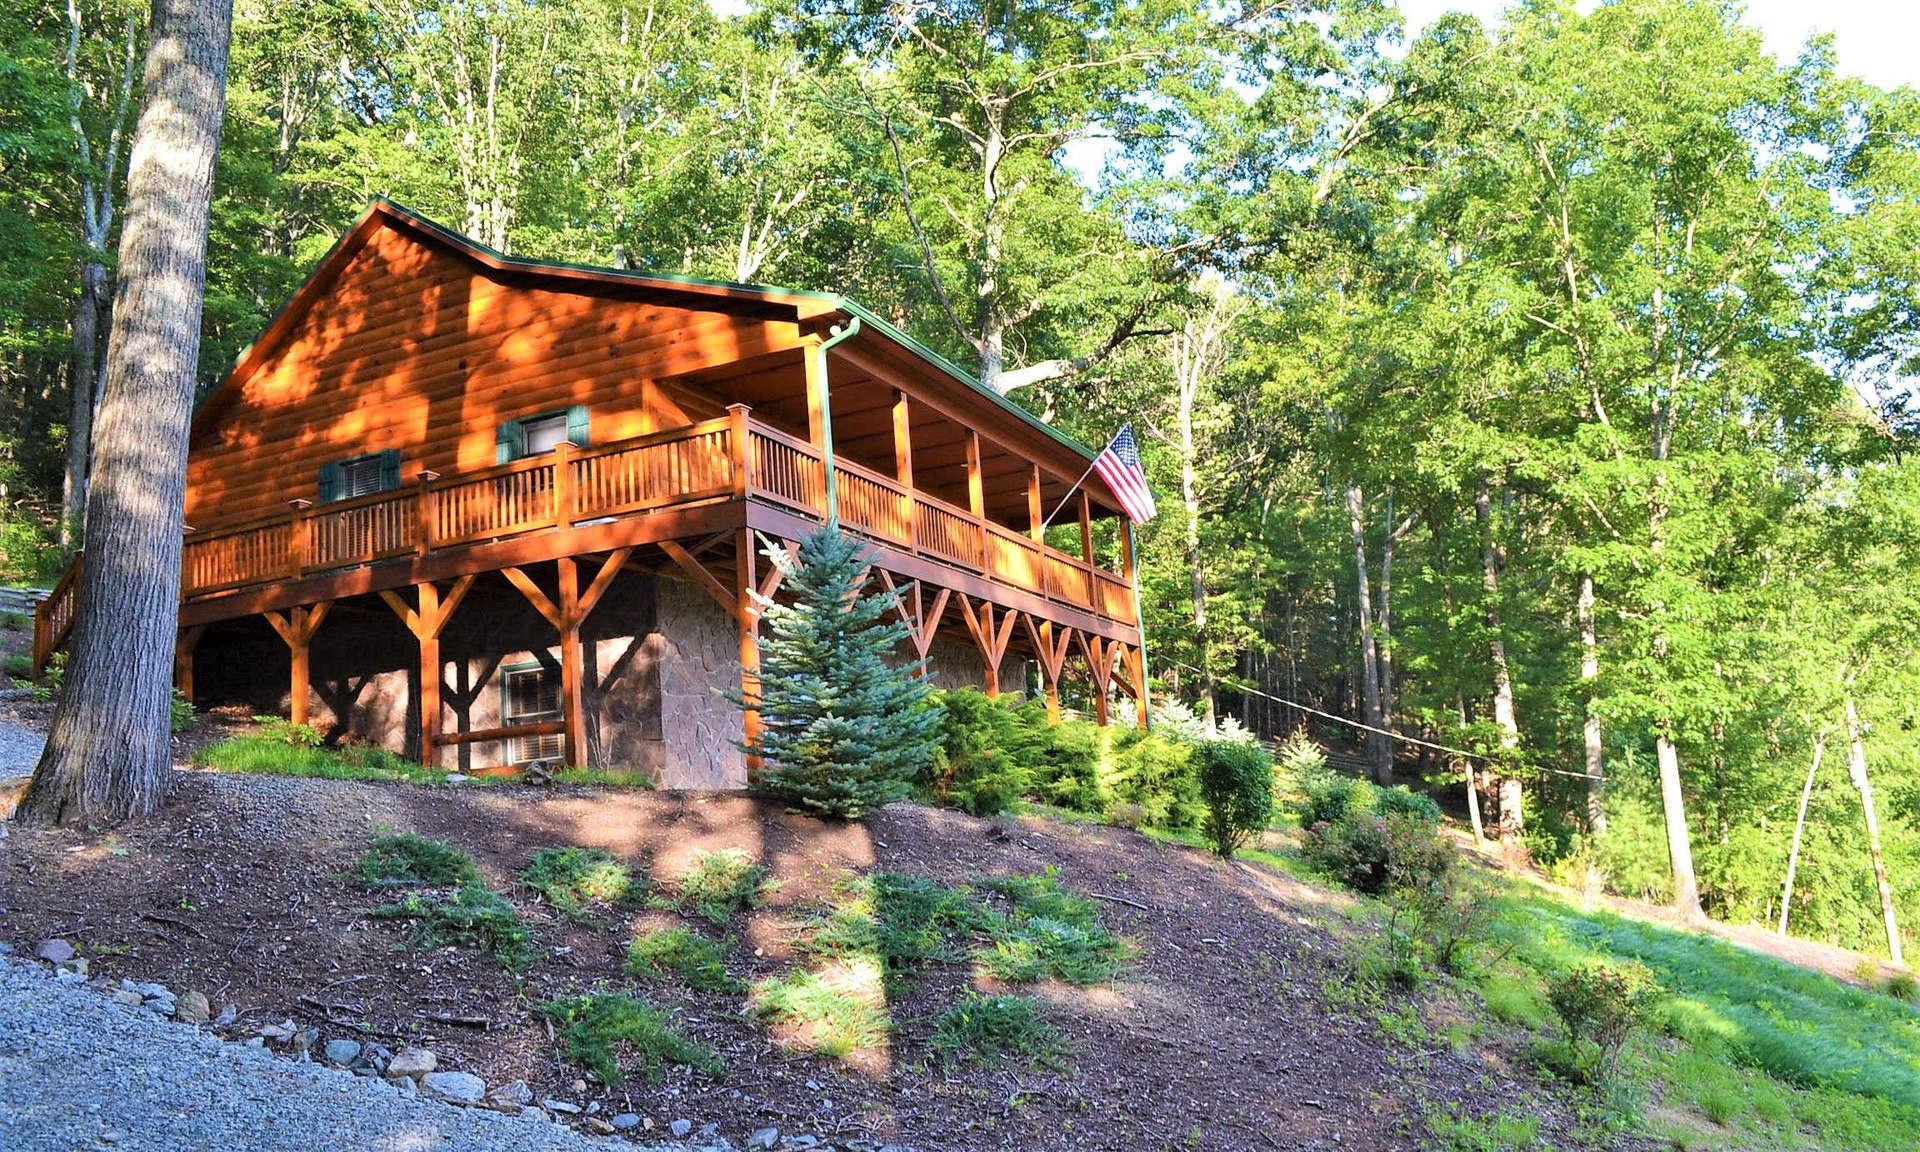 Enjoy the beauty of country farmland and the Virginia mountains beyond from the front porch of this immaculate quality built custom 2-bedroom, 2-bath Western Red Cedar cabin located in the beautiful Elk Creek Valley area of Grayson County, Southwestern VA.